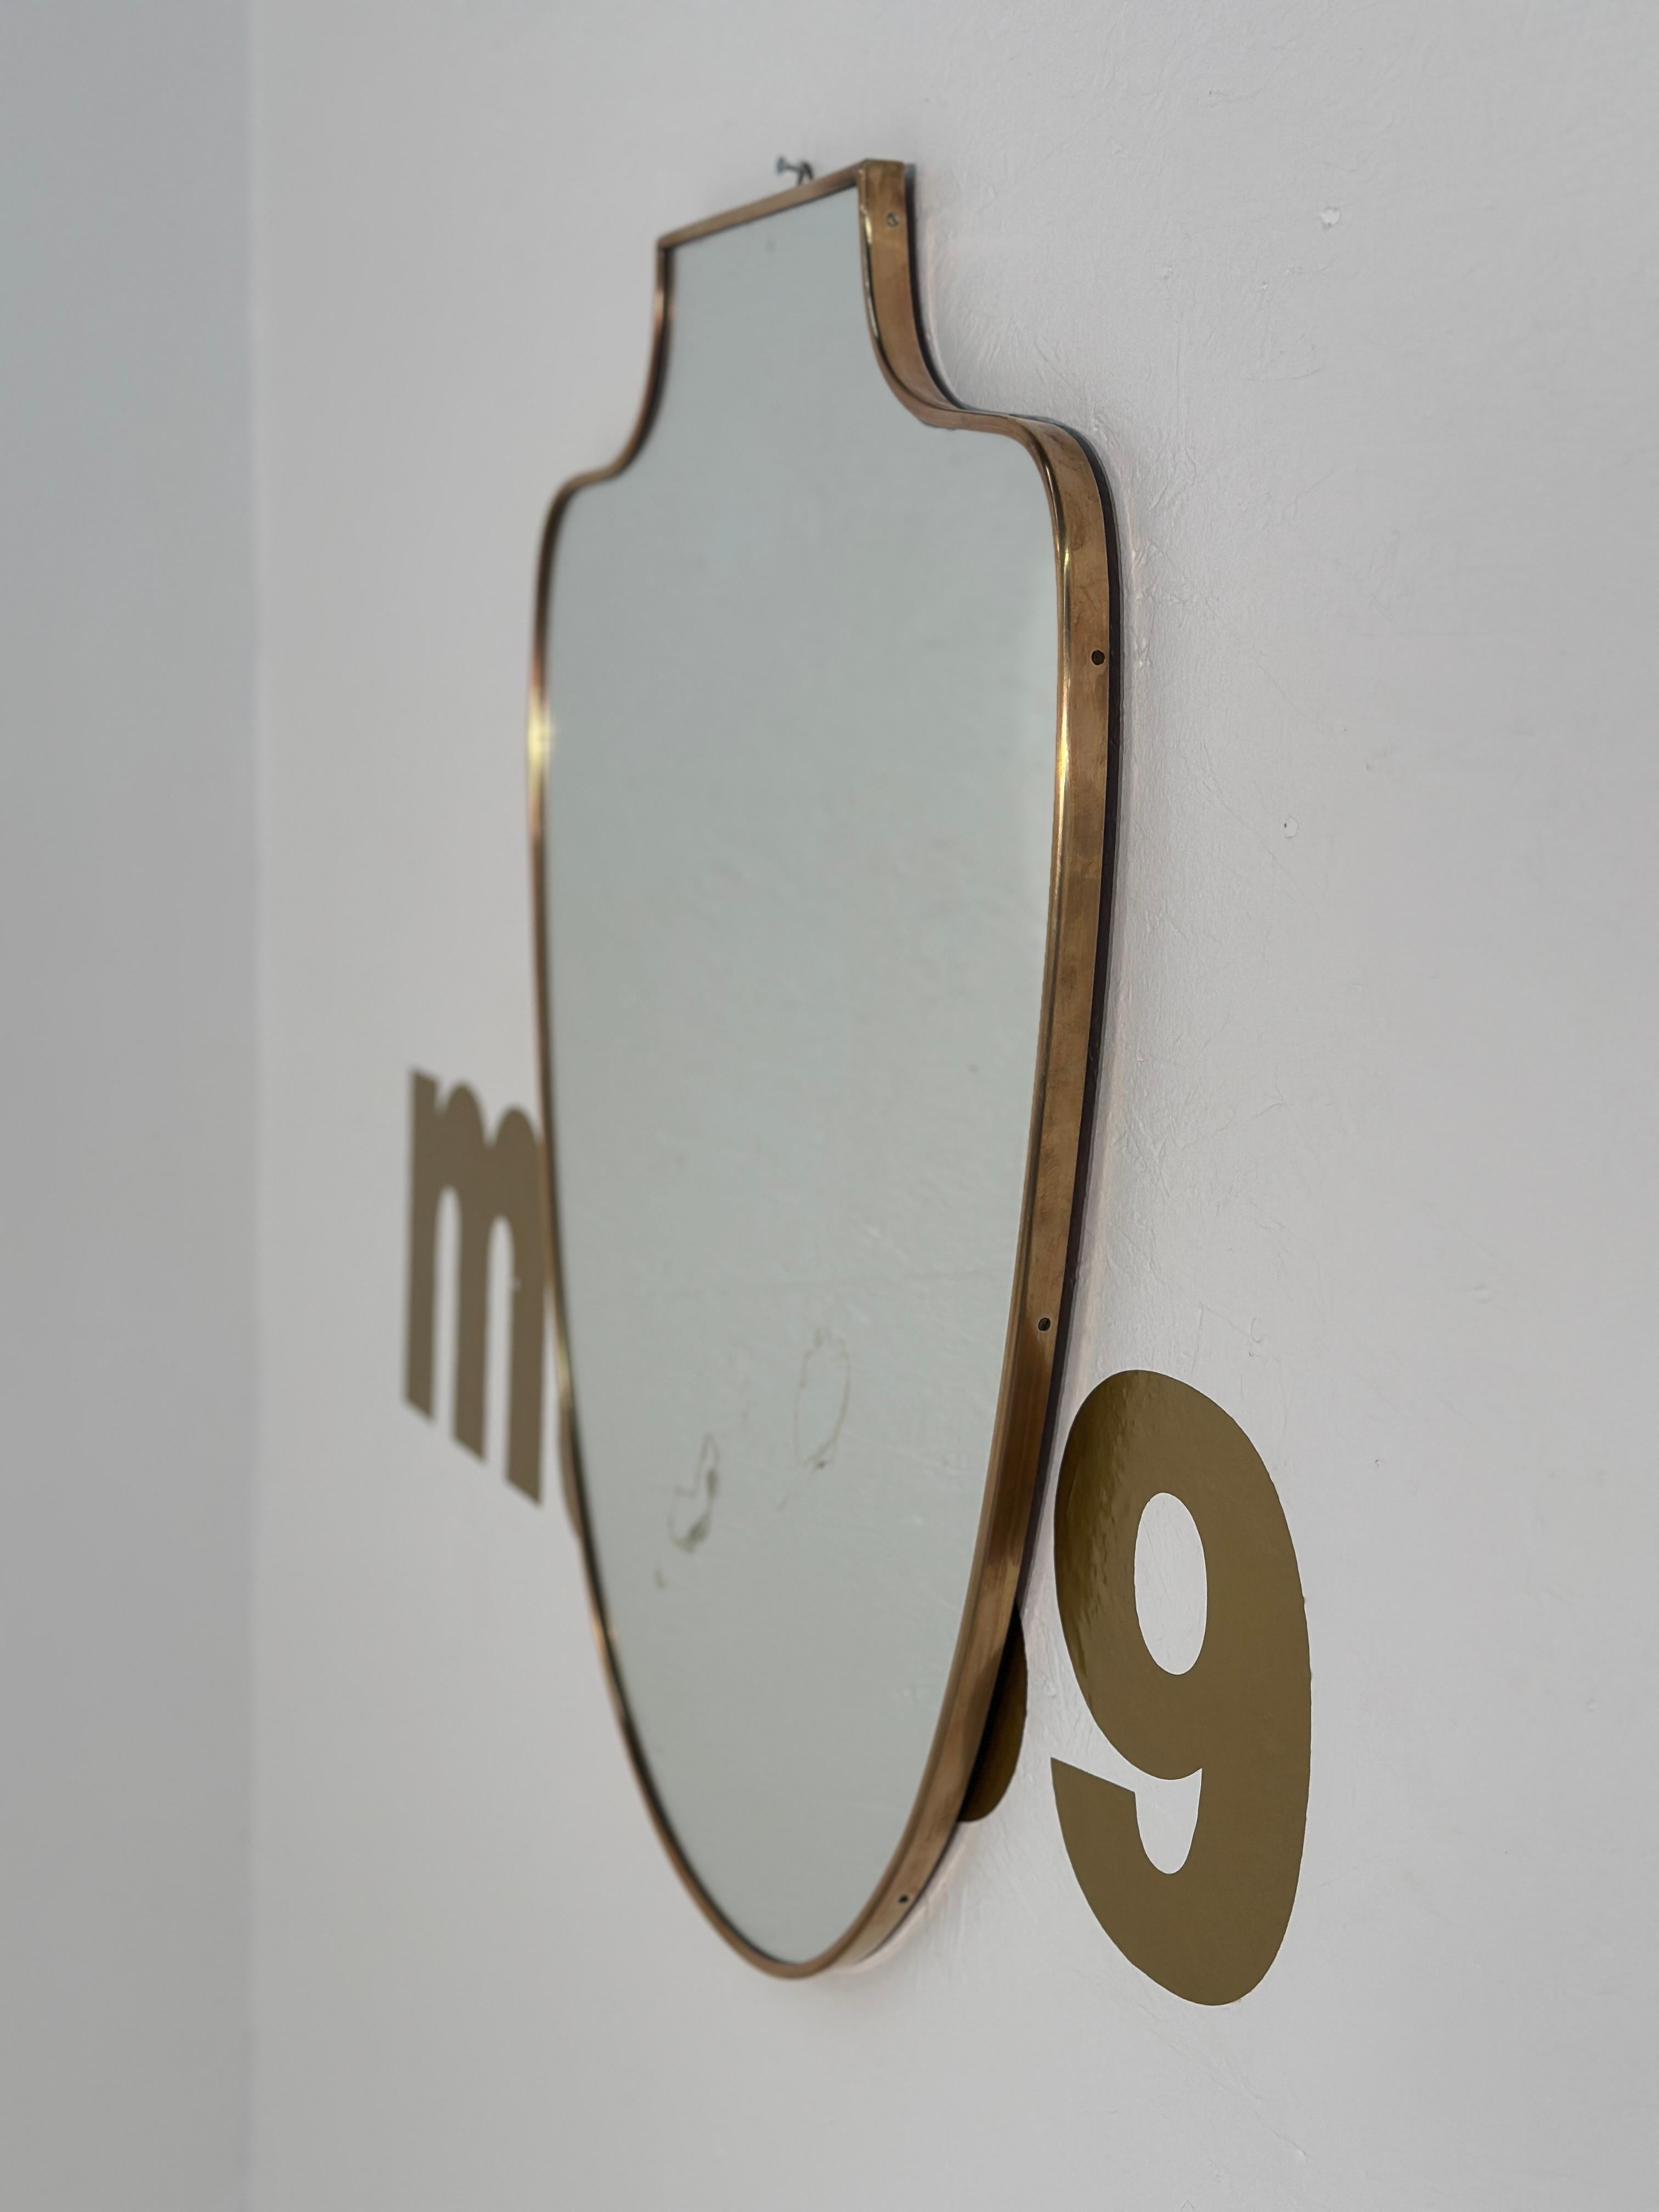 The Vintage Unique Brass Wall Mirror from the 1970s is a striking decor piece featuring a brass frame with intricate detailing, adding a touch of retro elegance to any space.

